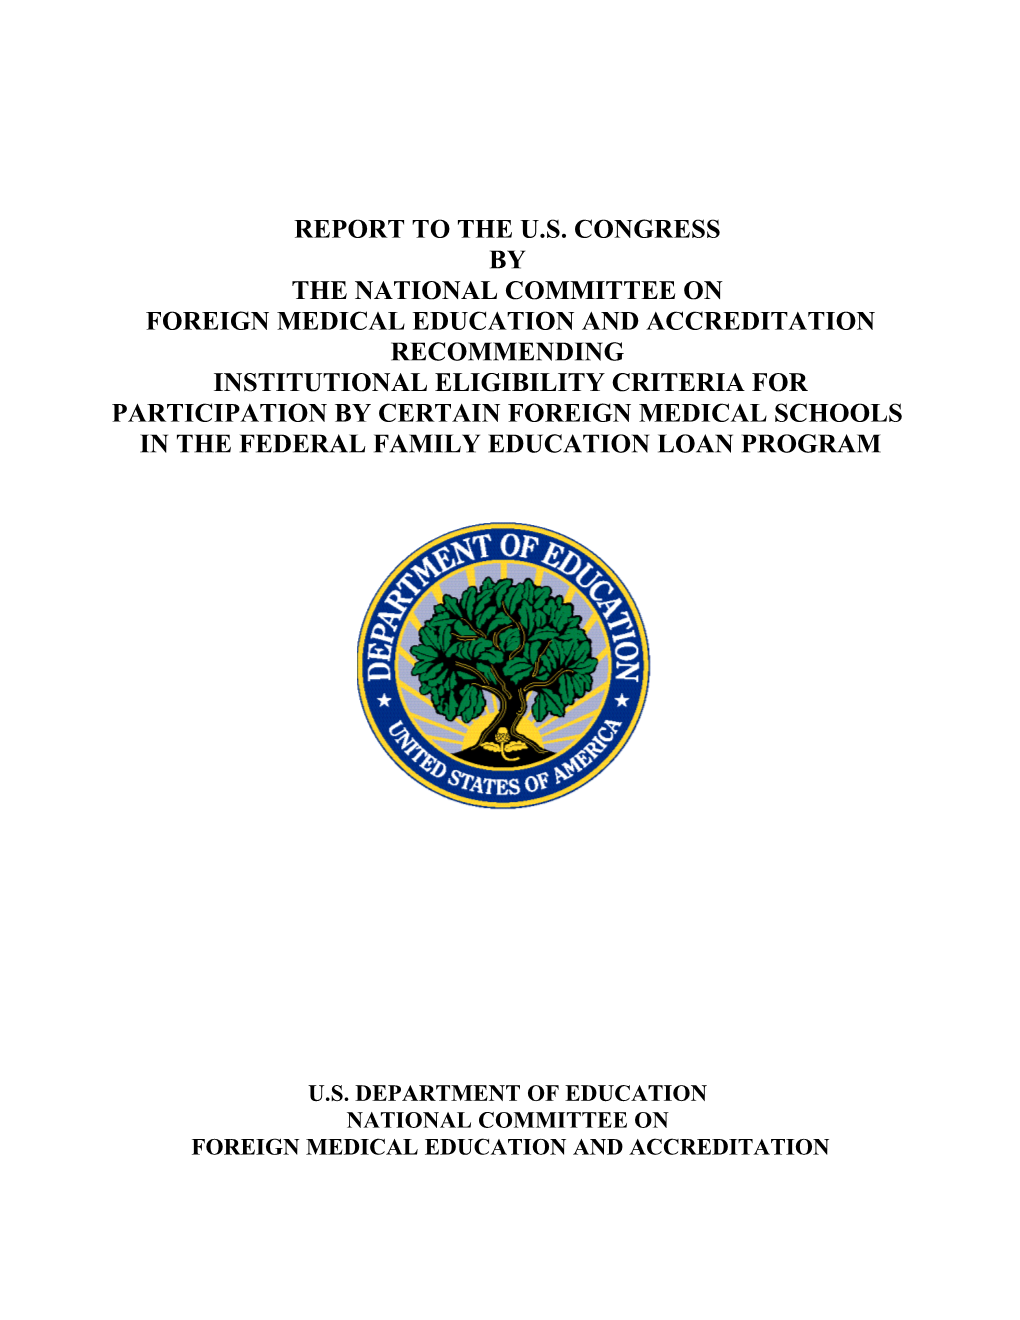 Report to the U.S. Congress by the National Committee on Foreign Medical Education And